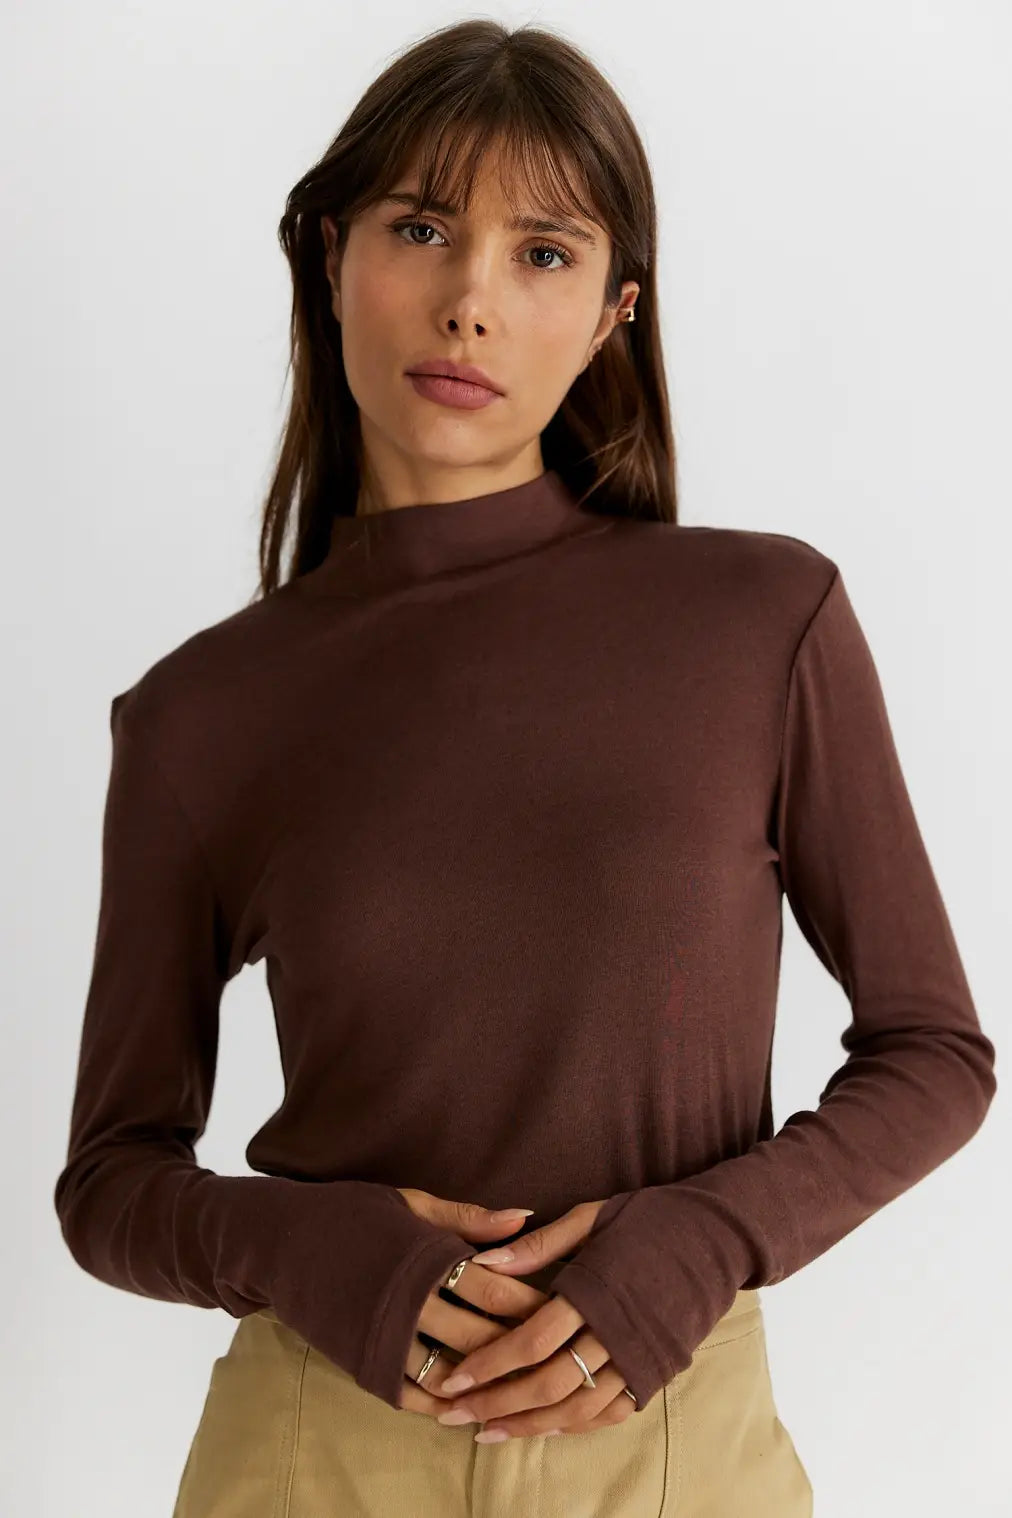 The most essential basic of your winter wardrobe is a good long sleeve to layer underneath warm winter coats. This mock neck long sleeve top is spun from a soft cotton blend that is lightweight and easy to wear. Thumb slits in sleeves to secure sleeves in place. Style yours tucked into any bottoms or with a layered look.